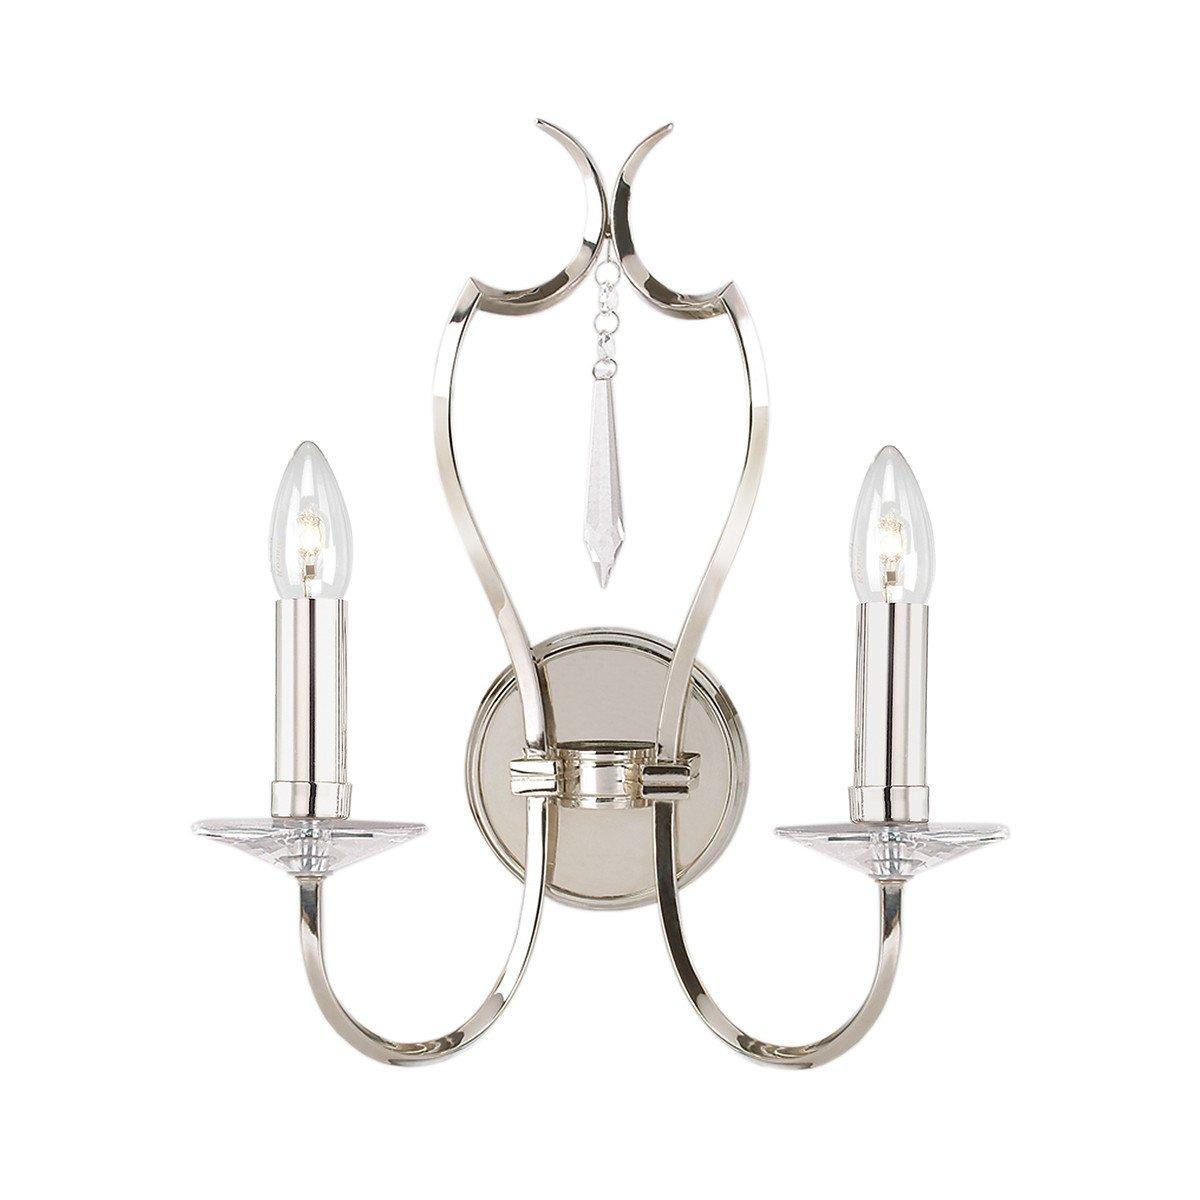 Pimlico 2 Light Indoor Candle Wall Light Polished Nickel E14